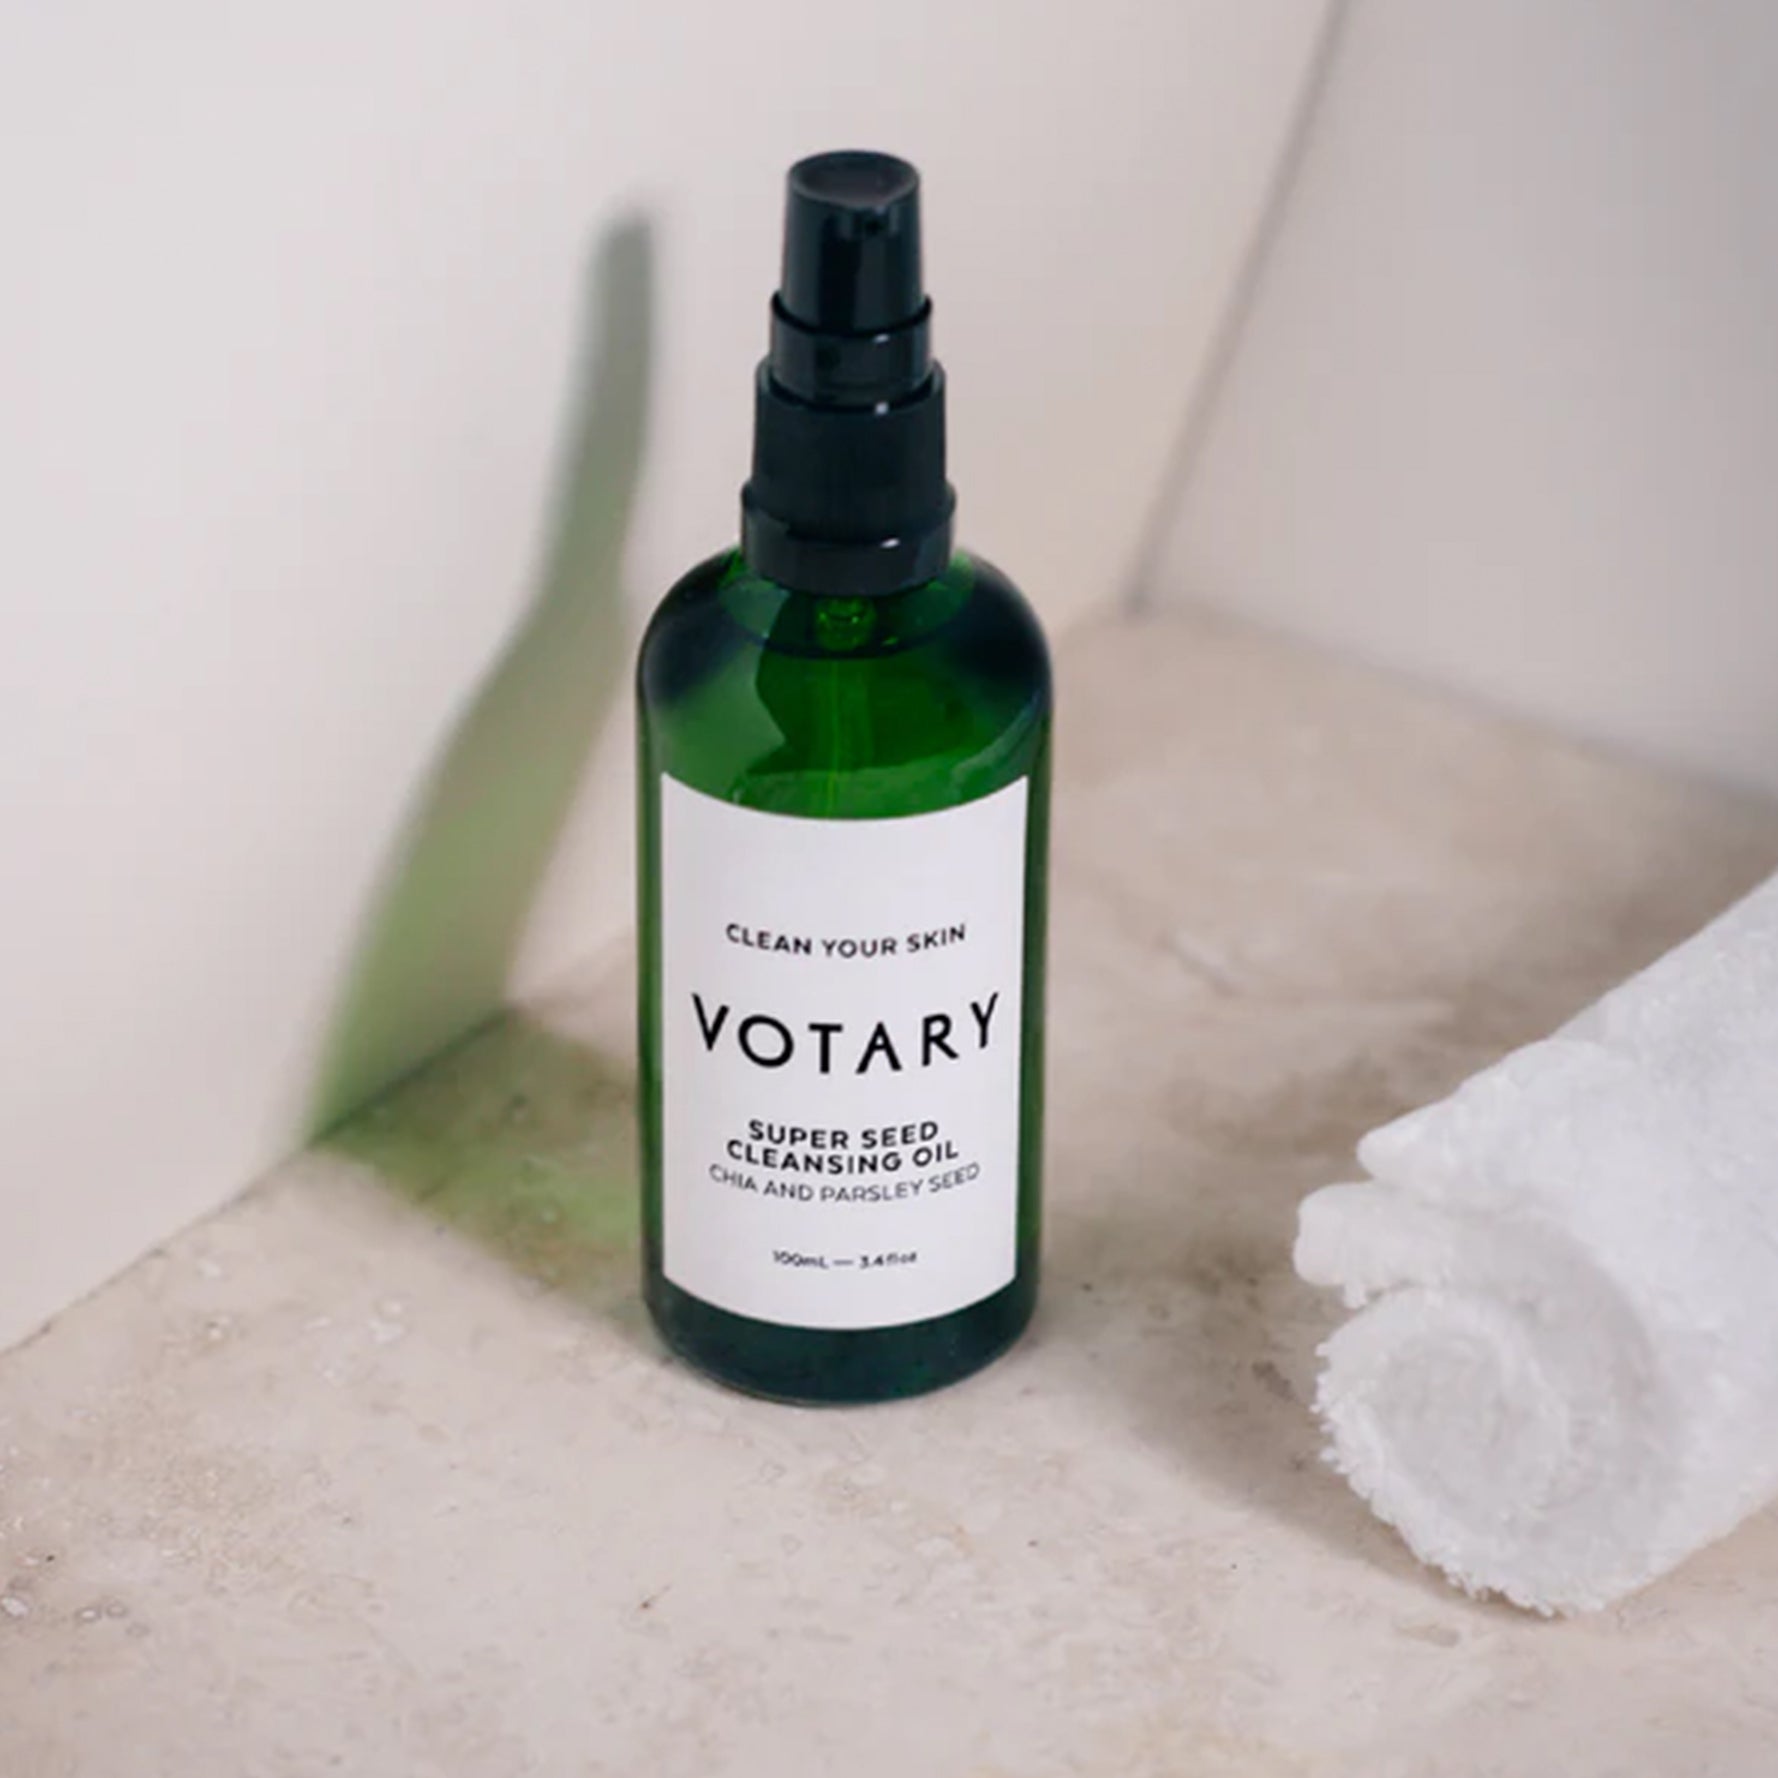 Votary - Super Seed Cleansing Oil - Chia and Parsley Seed